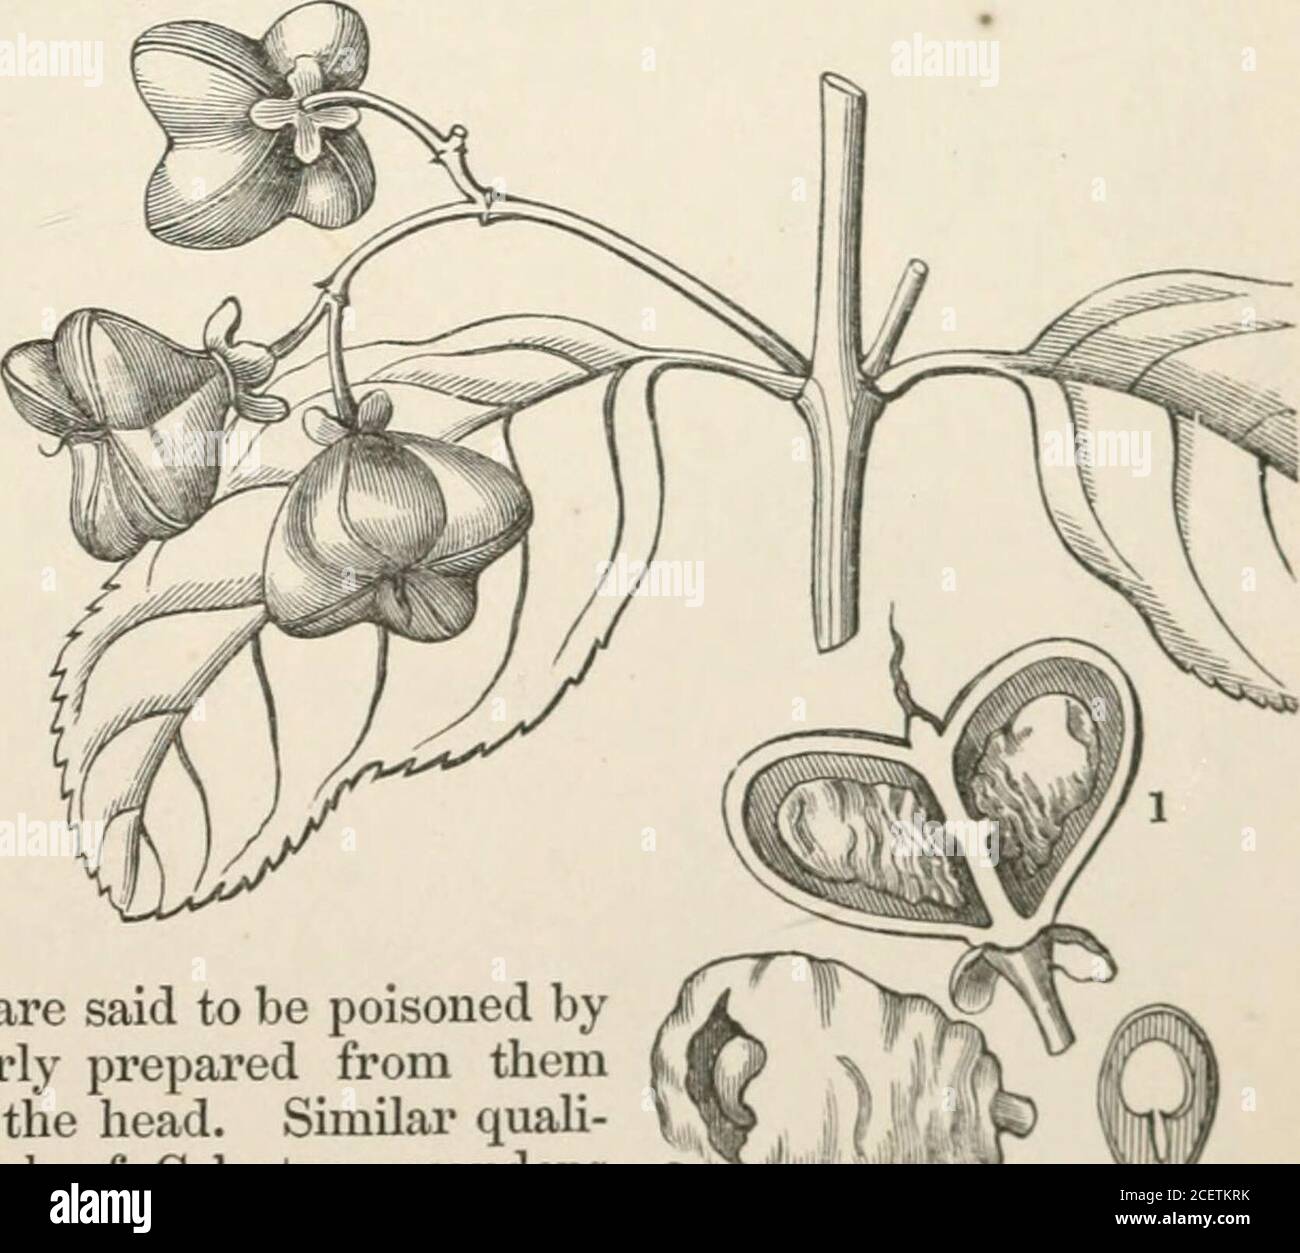 . The vegetable kingdom : or, The structure, classification, and uses of plants, illustrated upon the natural system. i-^i^. Fig. CCCXCVIII.. The drupes of Elseodeudron Kubu are eaten by the colonists of the Cape of Good Hope. Fig. CCCXCVIII.- Celastrus paniculatus.-Tr?/7/i)}dl.Lophopetalum, Wight.Evonymus, Tournef.Poljcardia, Juss. Florinda, Noronh. Commersonia, Comms.Catha, Forsk. Sonneratia, Commers.Celastrus, Kunth.Majlenus, Juss. Maiten, Feuill. GENERA.Hcenkea, Ruiz, et Pav.|Hartogia, Thunh.Microtropis, Wall. Schrebera, Thunb. Pterocelastrus, Meisn. j Elaeodendron, Jacq.Asterocarpus, Eckl Stock Photo